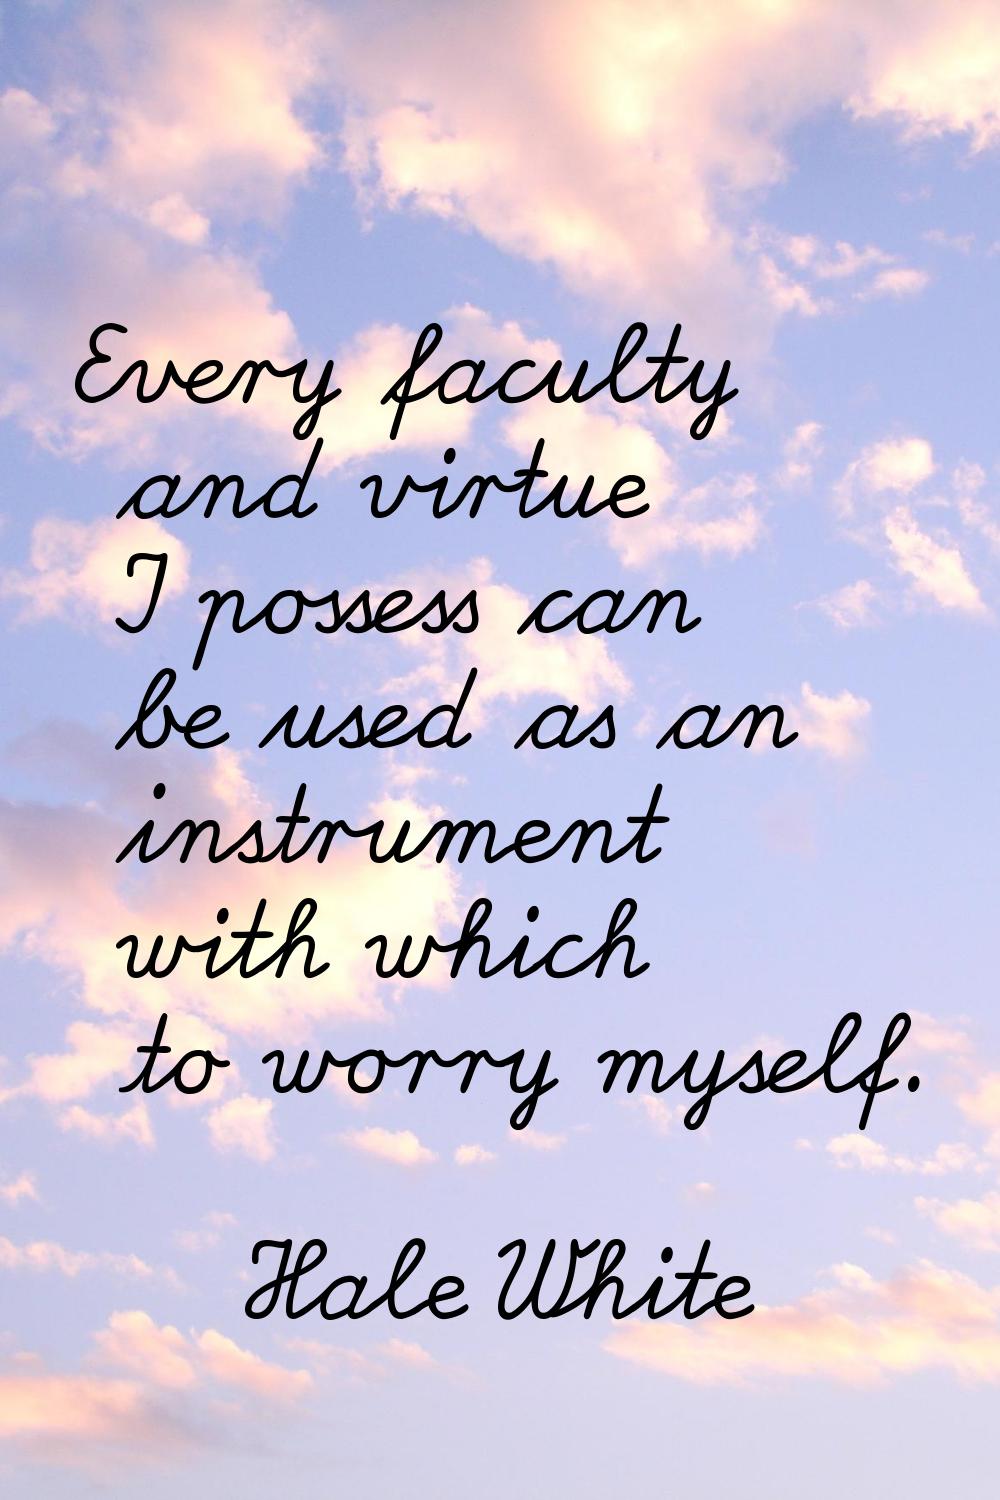 Every faculty and virtue I possess can be used as an instrument with which to worry myself.